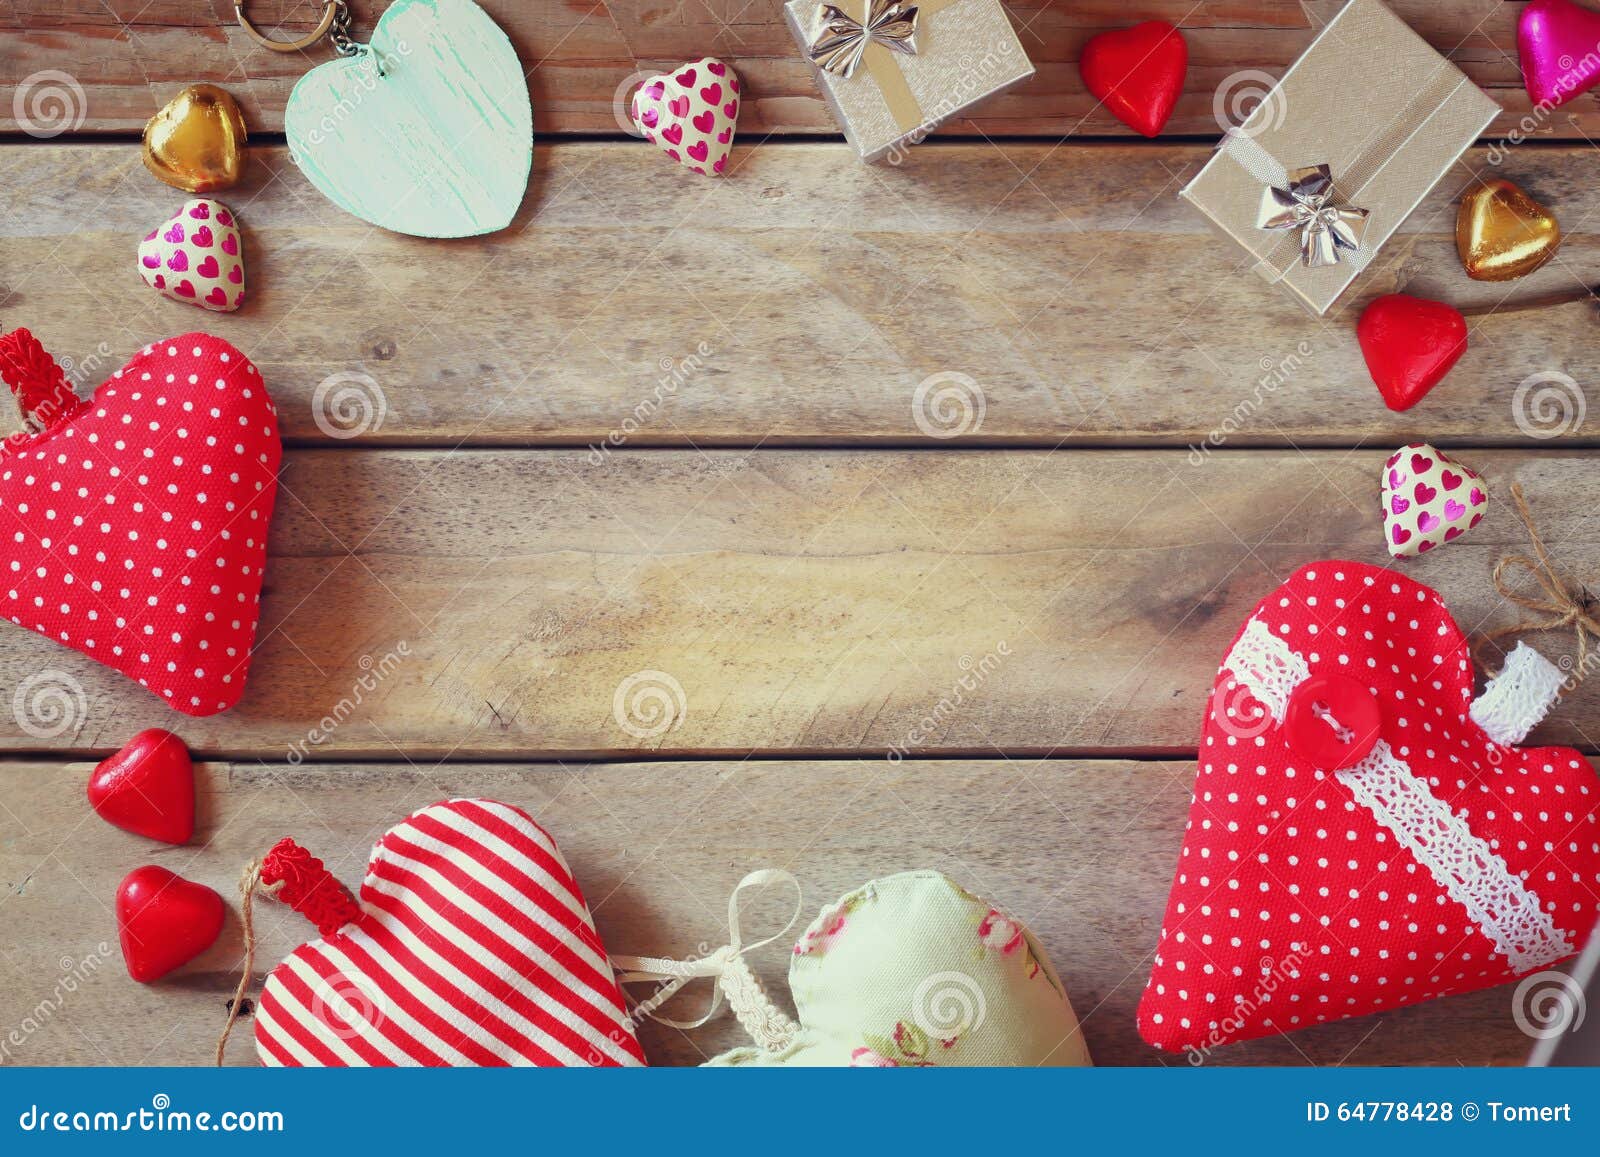 Top View Image of Colorful Heart Shape Chocolates, Fabric Hearts and ...